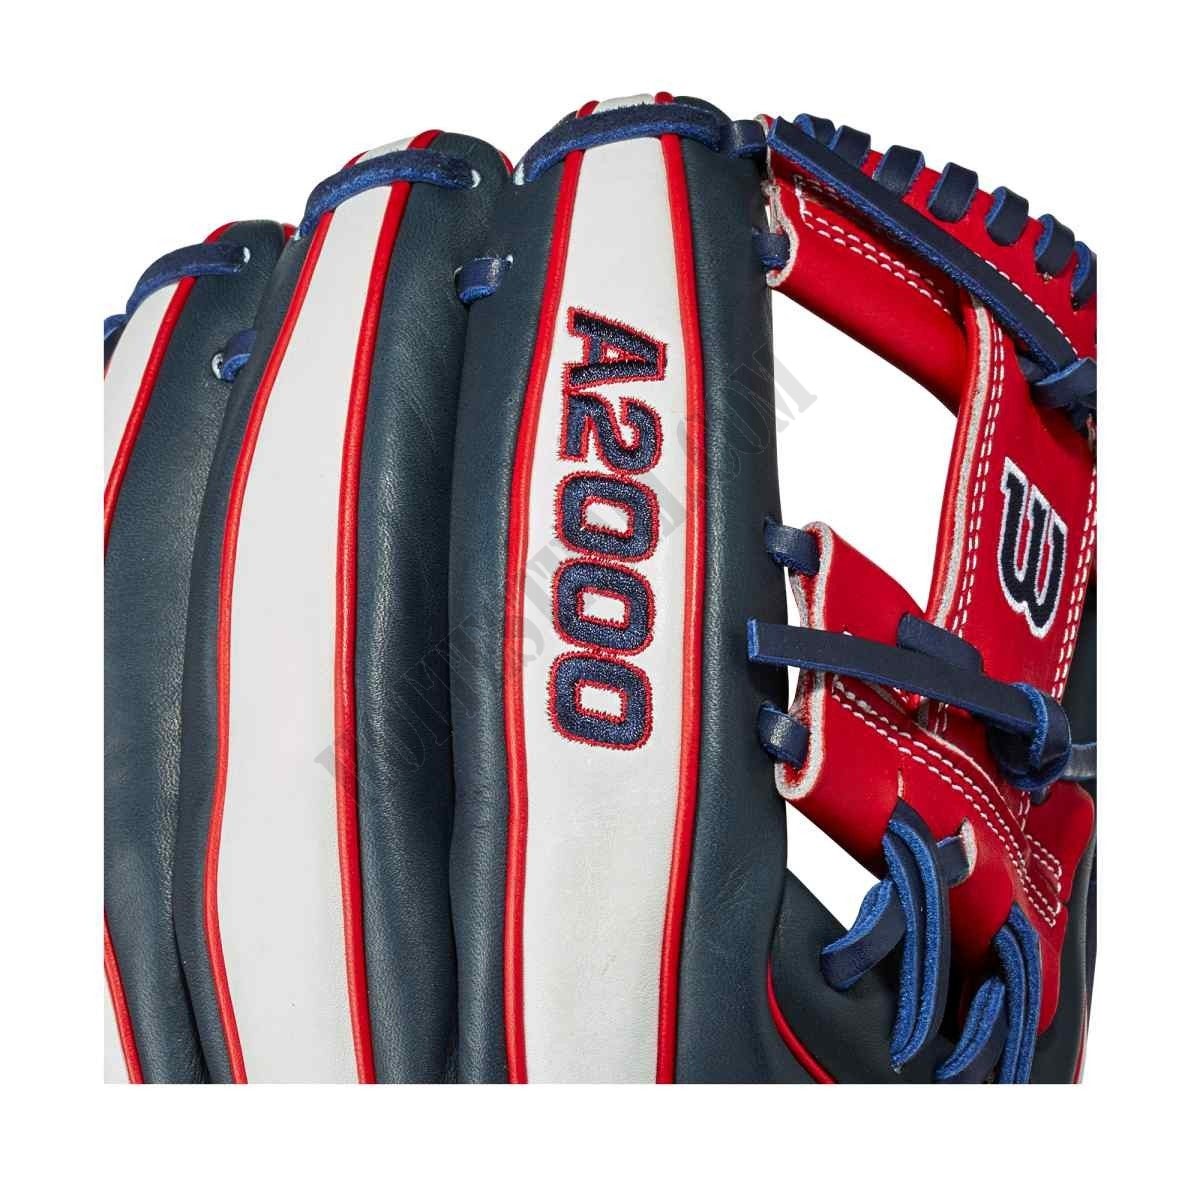 2021 A2000 1786 Cuba 11.5" Infield Baseball Glove - Limited Edition ● Wilson Promotions - -6